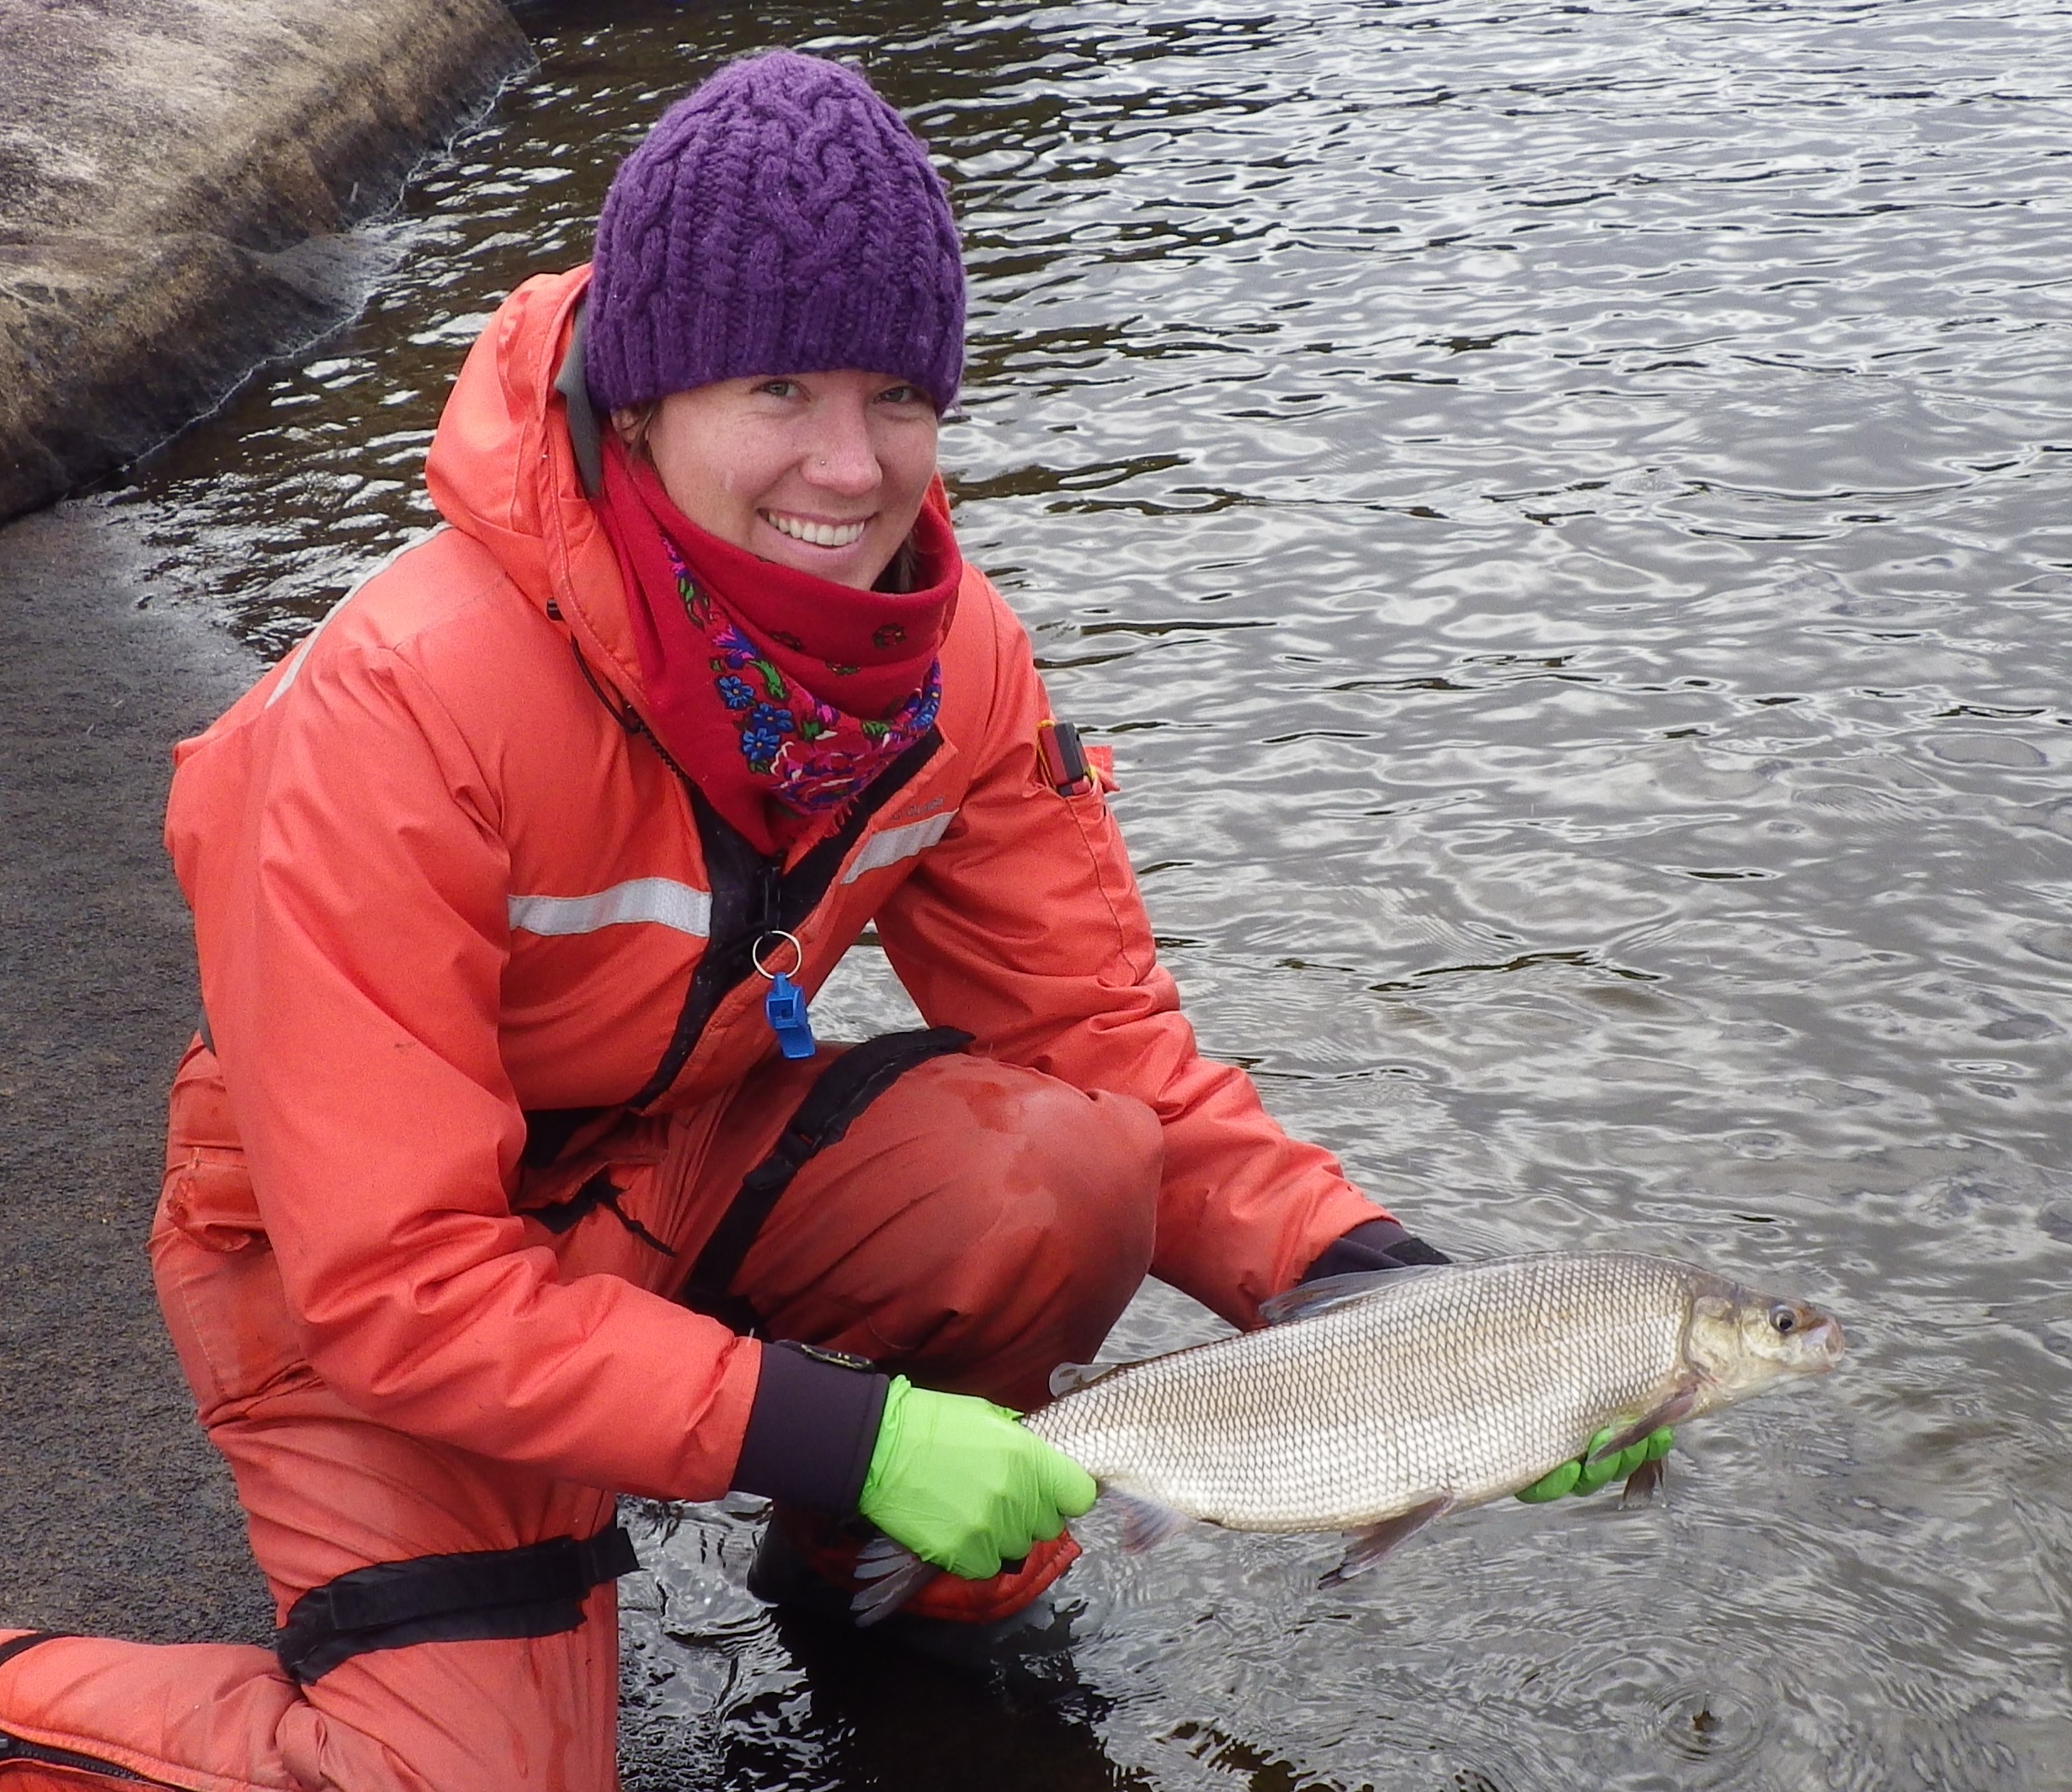 Researcher Lee Hrenchuk releasing a whitefish during the study. (Photo by Paul Blanchfield)